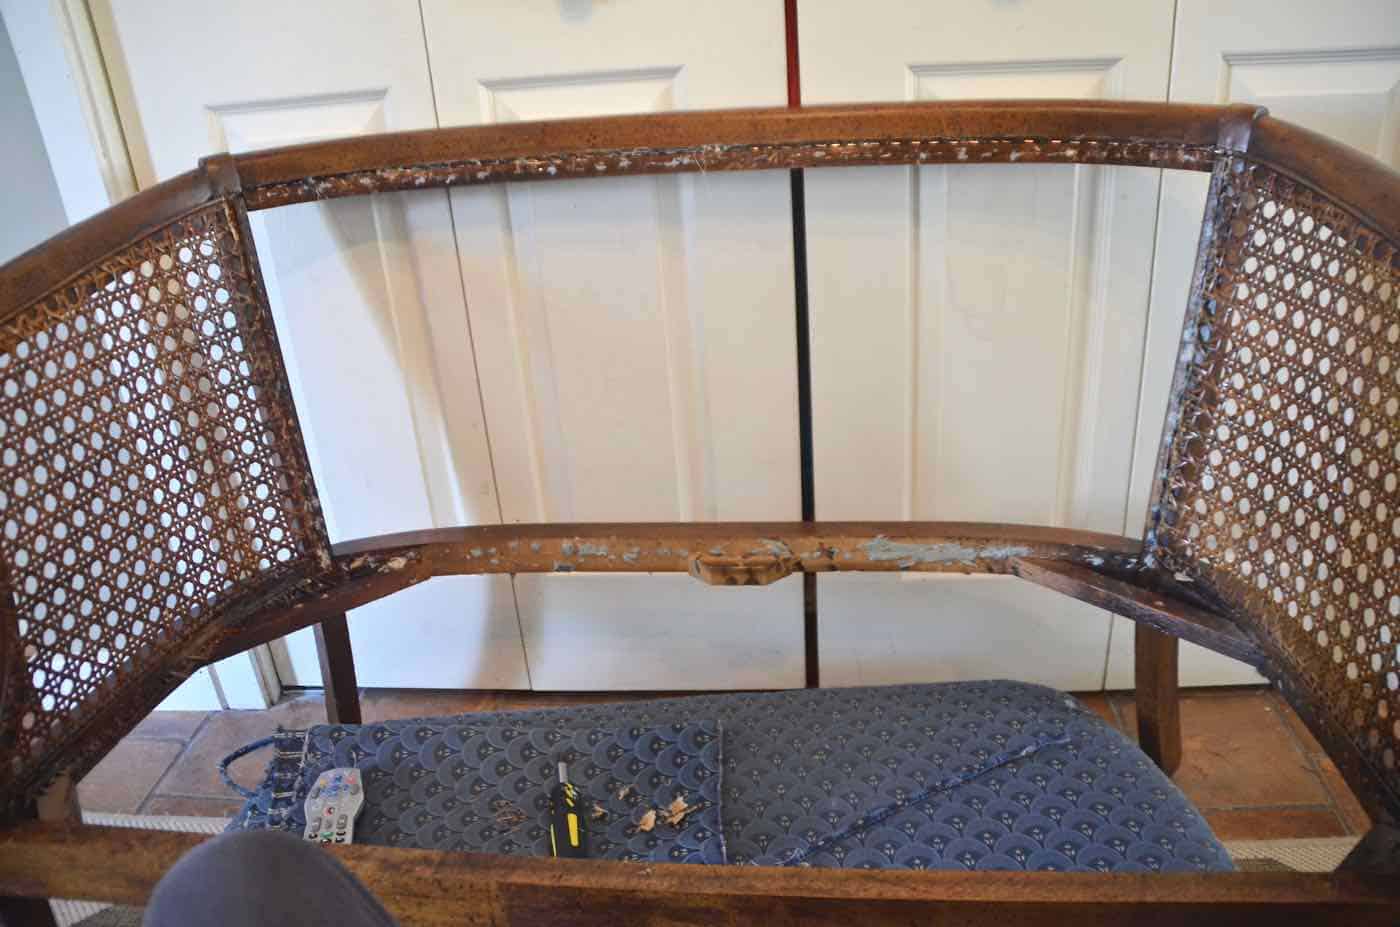 Refinishing a dated loveseat with chalkpaint and new upholstery.